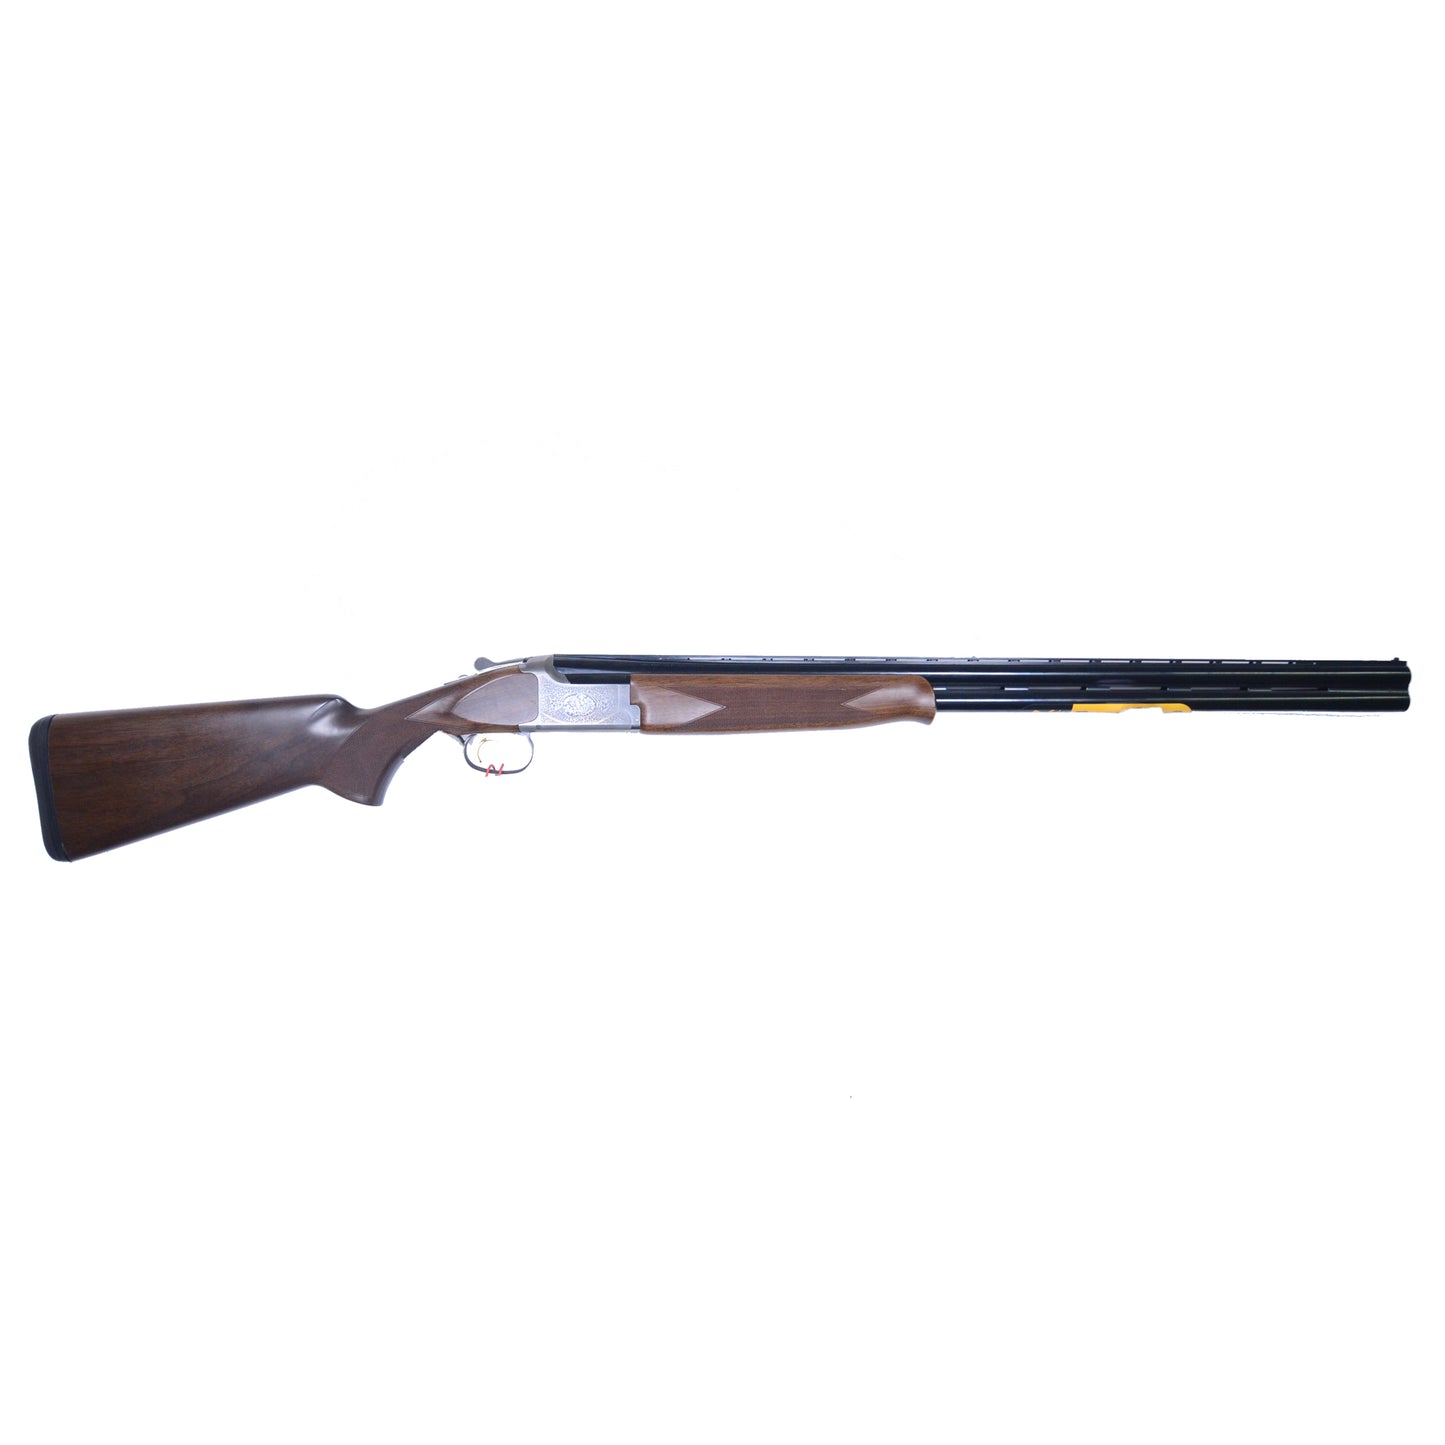 Browning 525 Sporter (New) - 5050